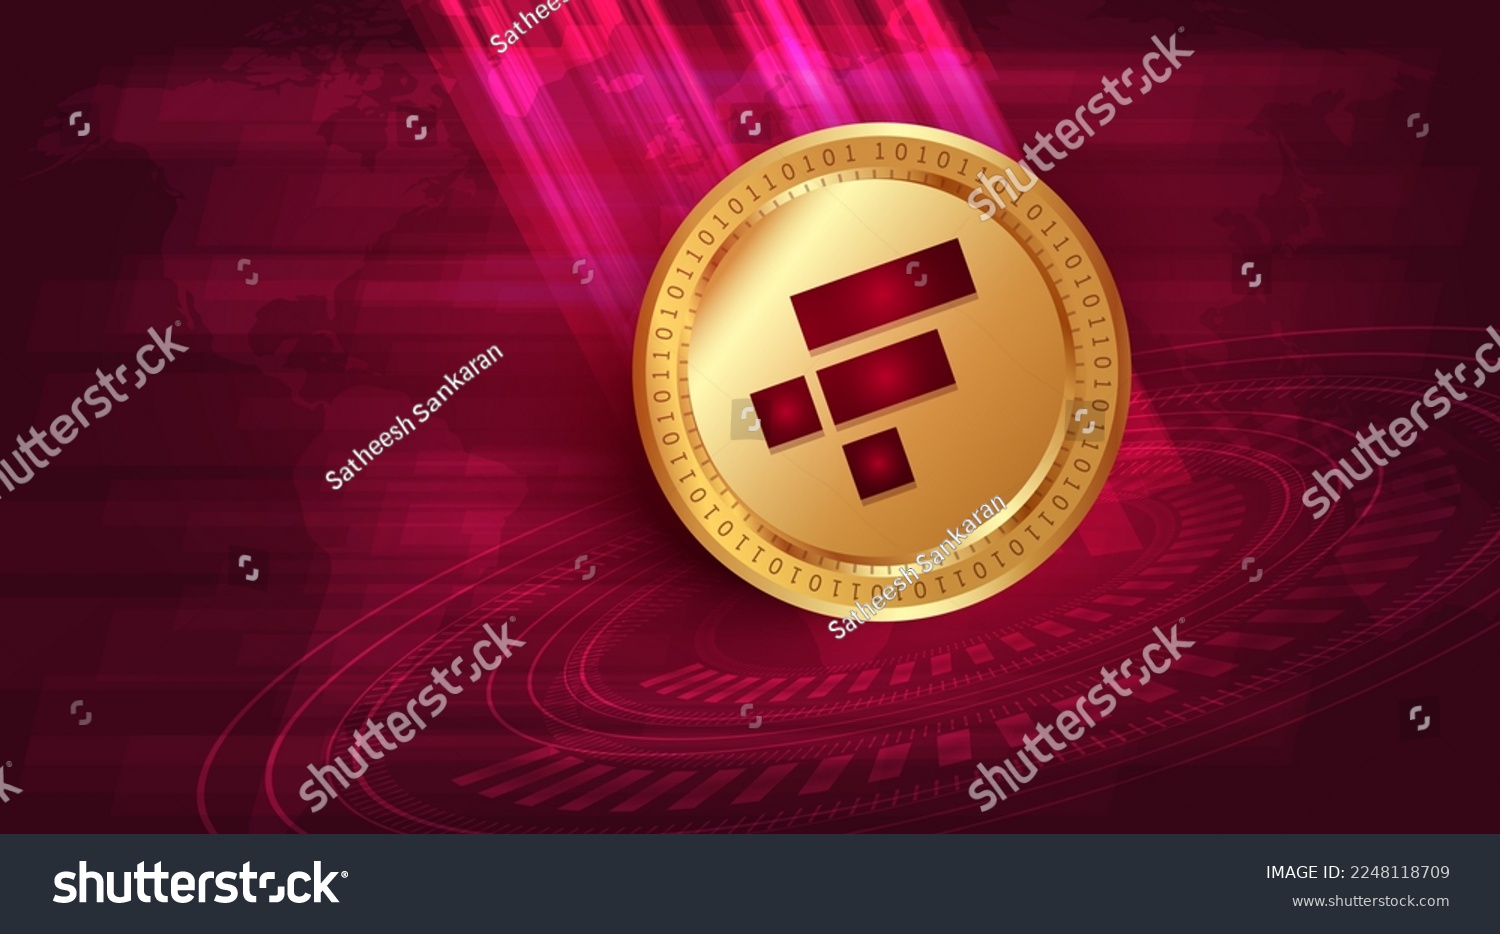 SVG of FTX Protocol (FTT) crypto currency banner and background svg